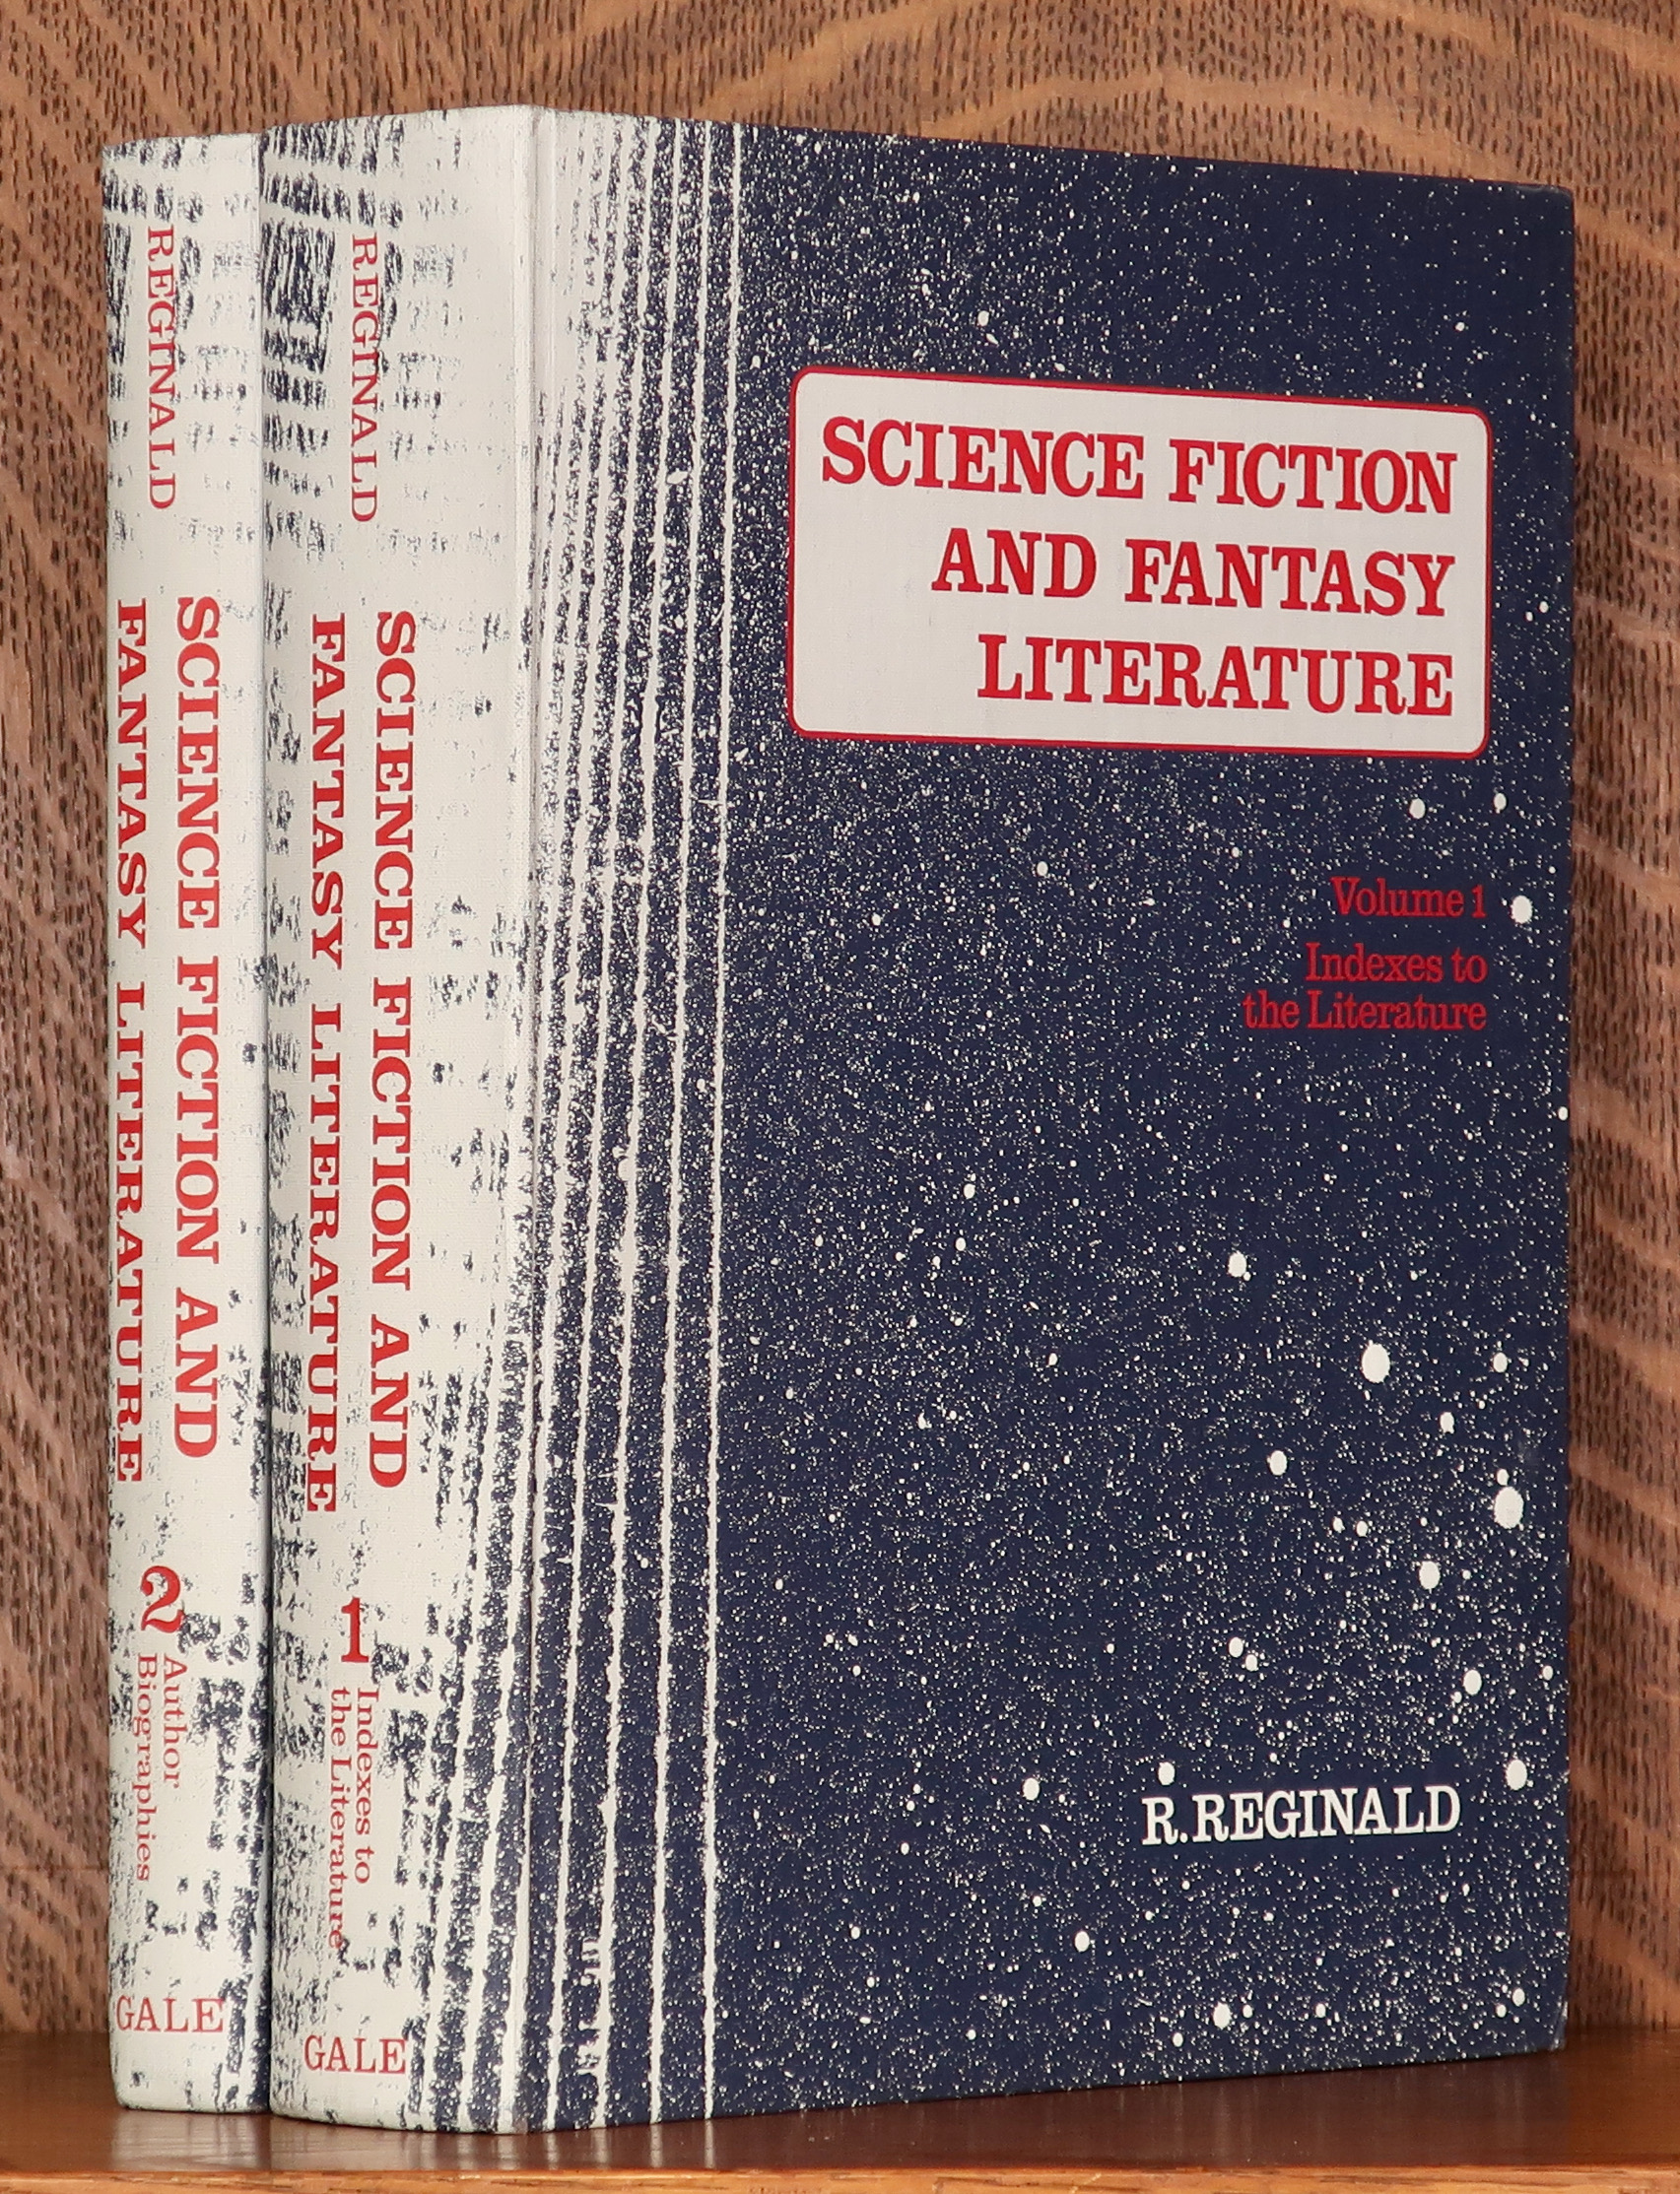 SCIENCE FICTION AND FANTASY LITERATURE - A CHECKLIST 1700-1974 WITH CONTEMPORARY SCIENCE FICTION AUTHORS II - 2 VOL. SET (COMPLETE) - R. Reginald